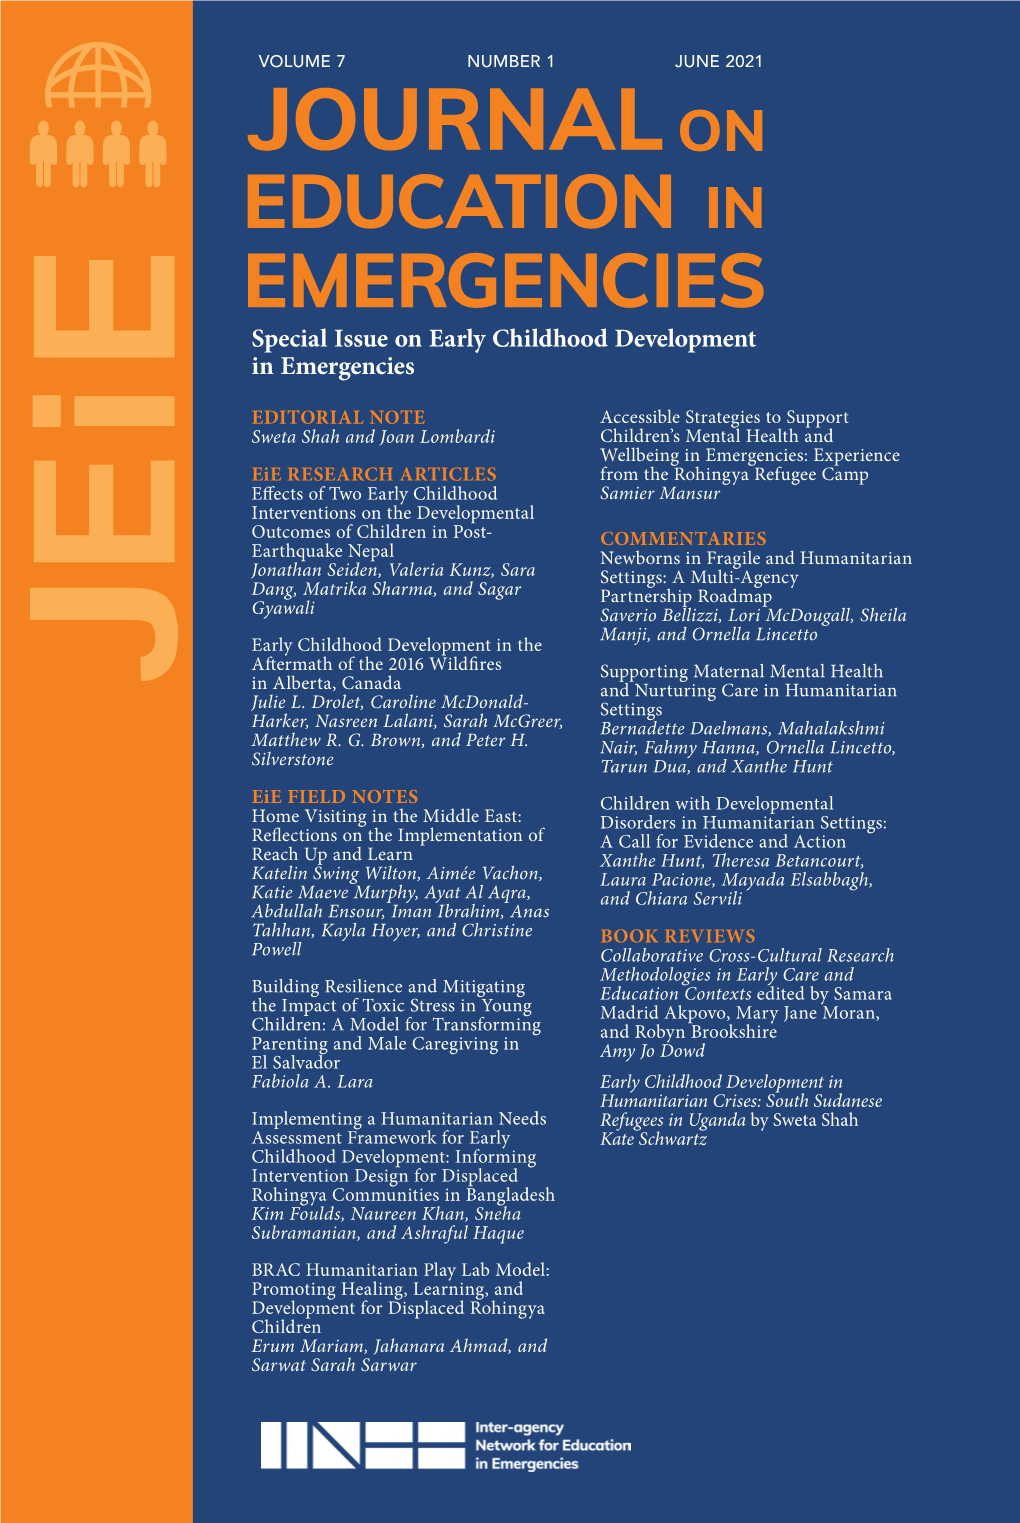 Special Issue on Early Childhood Development in Emergencies